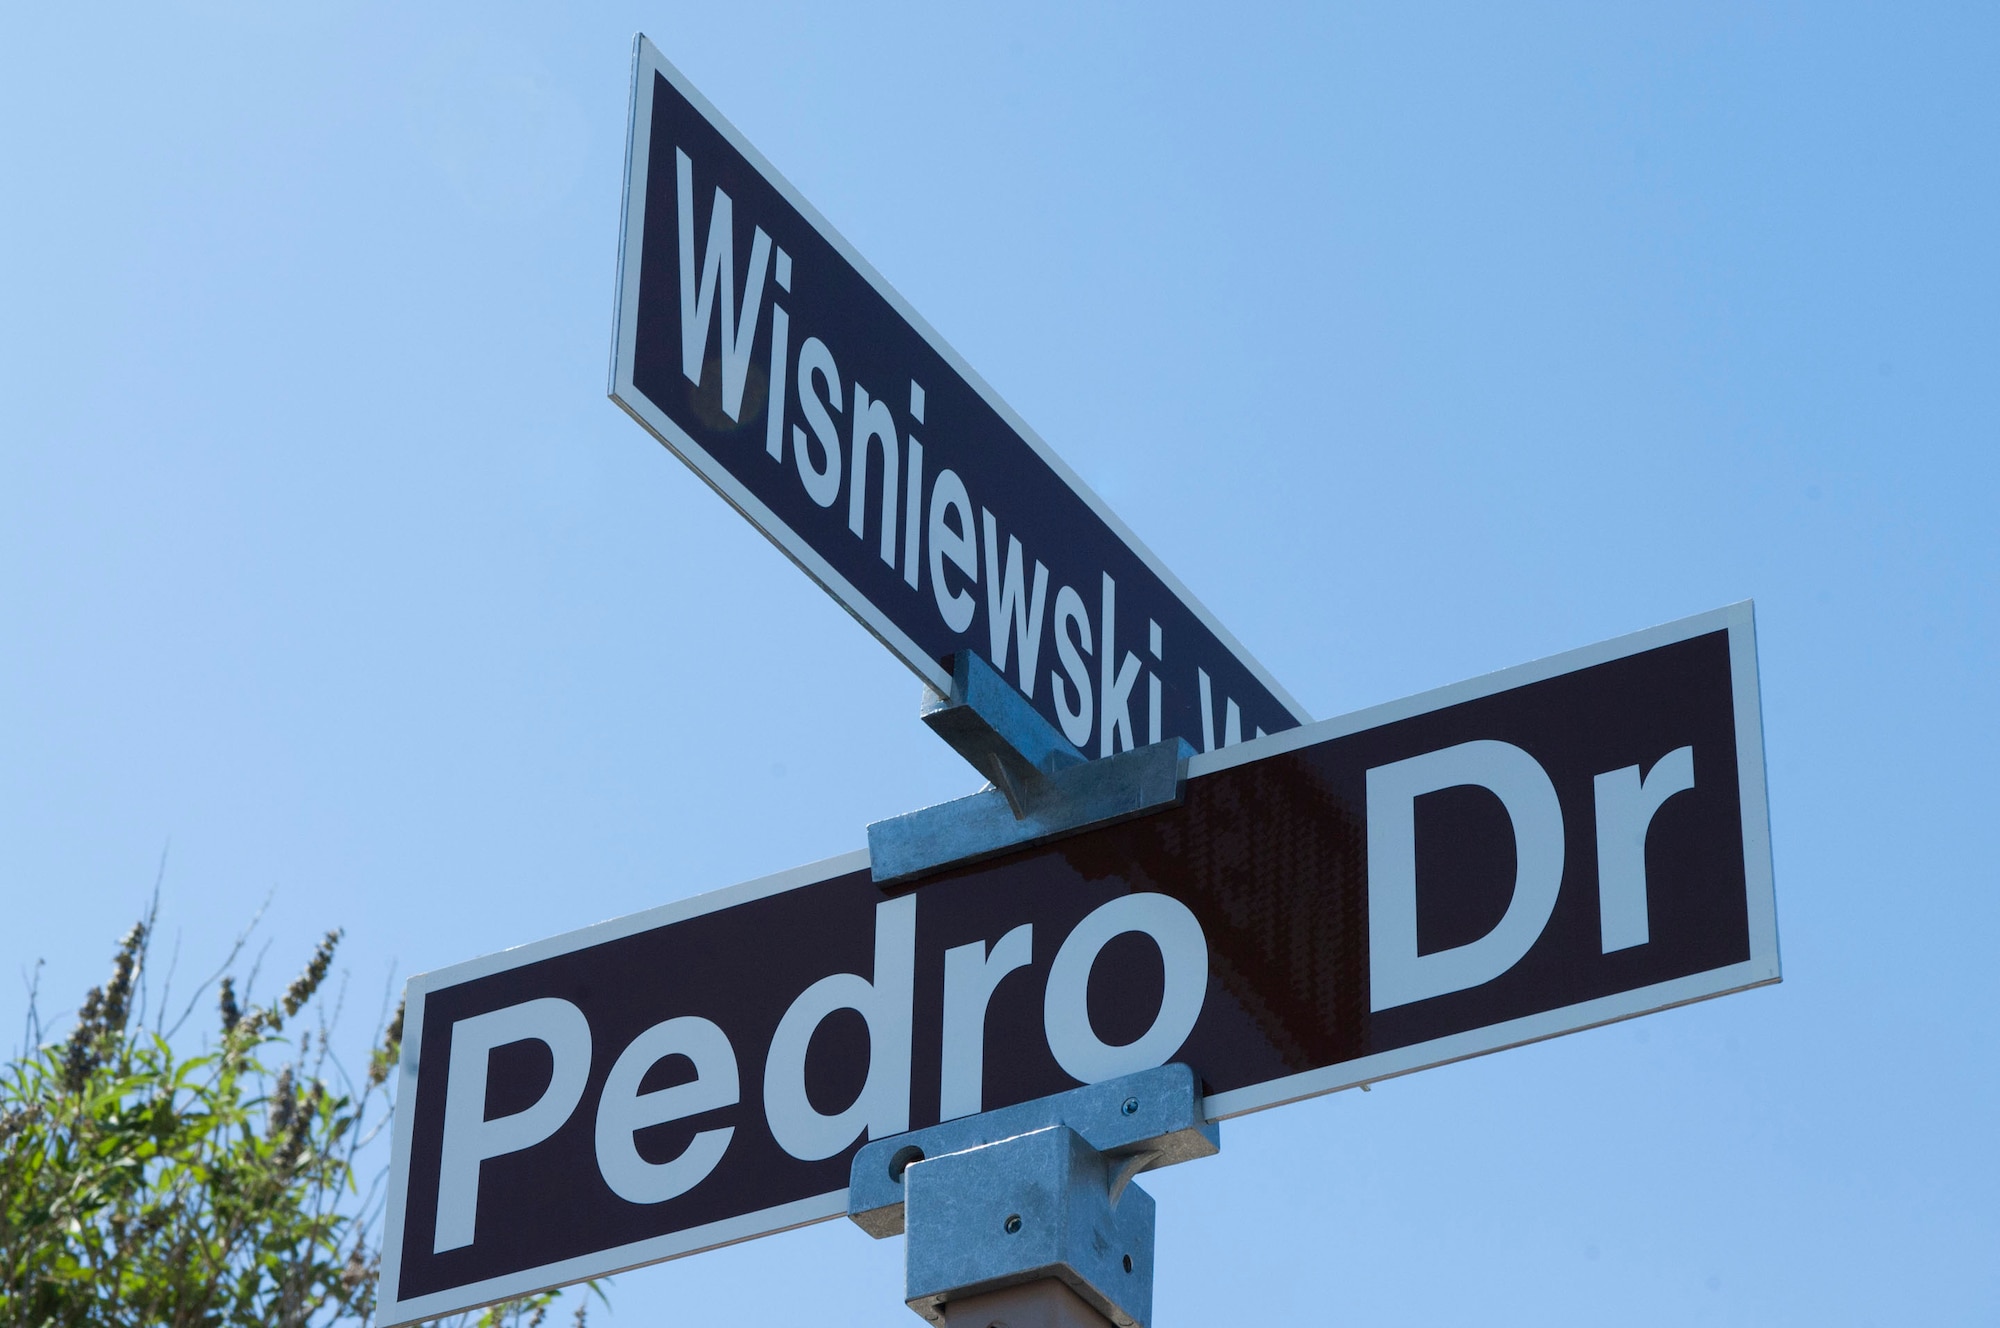 The name of Capt. David Wisniewski is displayed on a street sign in front of the 66th Rescue Squadron at Nellis Air Force Base, Nev. During a ceremony June 10, 2013, three streets were renamed in honor of the PEDRO 66 crew, whose HH60G Pave Hawk helicopter was shot down during rescue operations. (U.S. Air Force photo by Airman 1st Class Joshua Kleinholz)